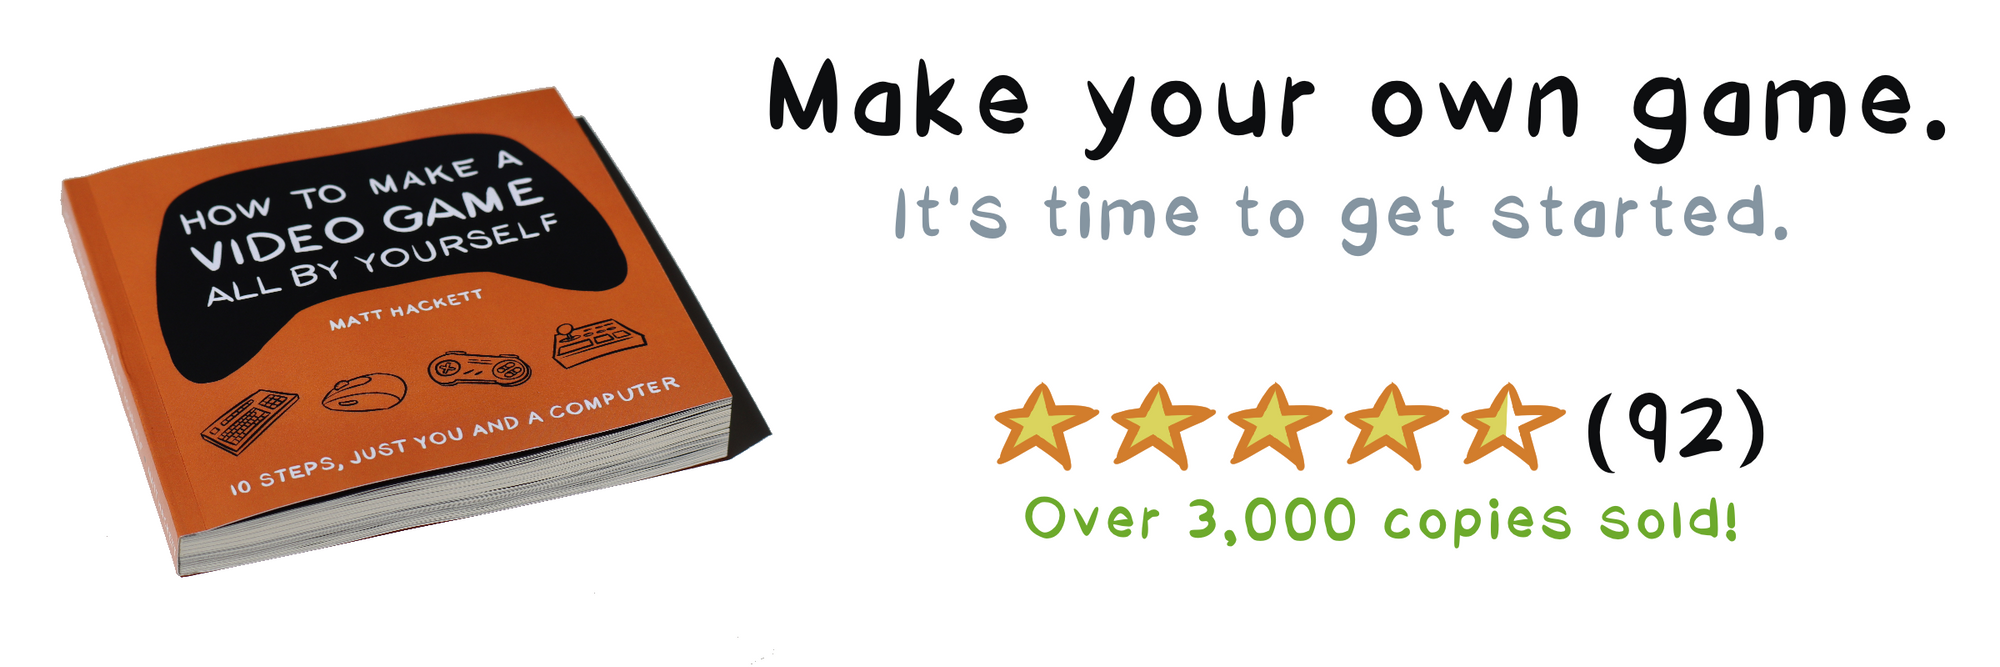 Make your own game. It's time to get started. Over 3,000 copies sold!